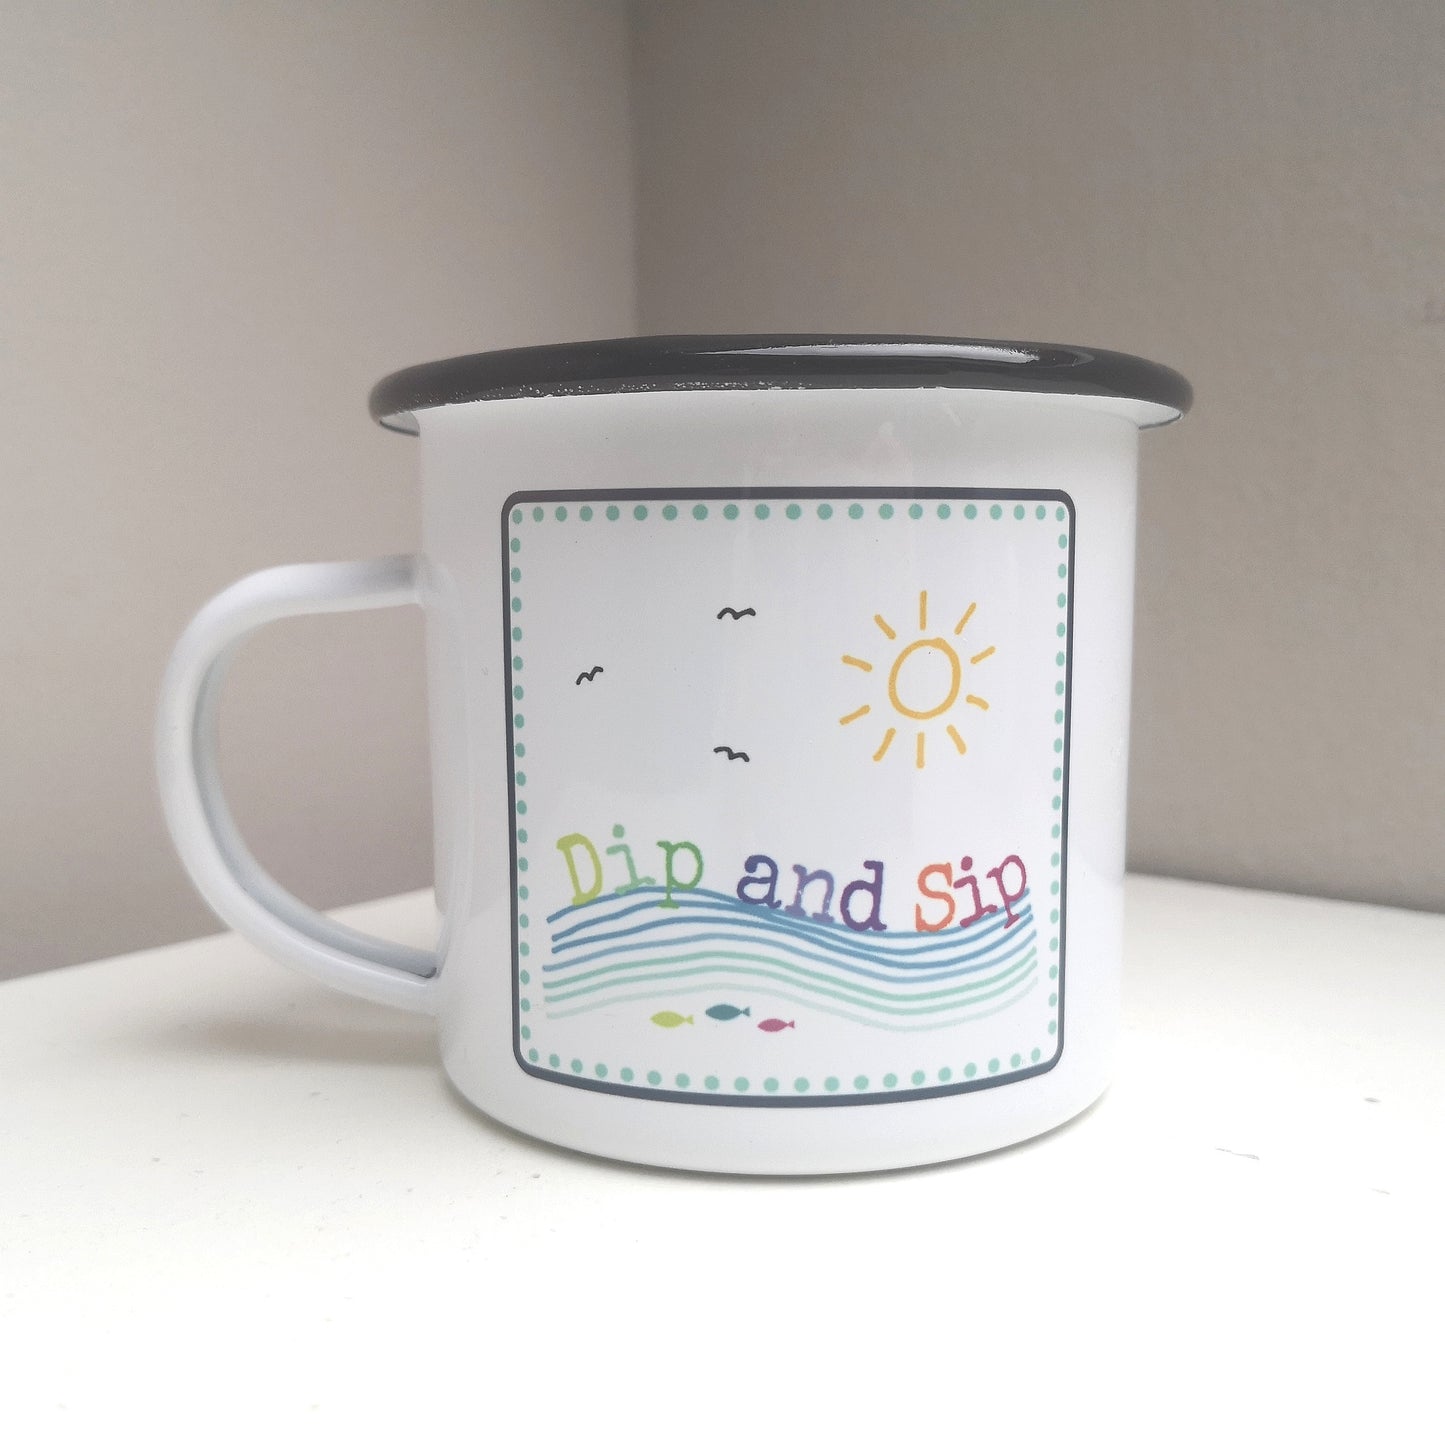 A white steel enamel mug with a year round swimmer's mantra on it - dip and sip. Photo shows the rainbow coloured design with 3 fish